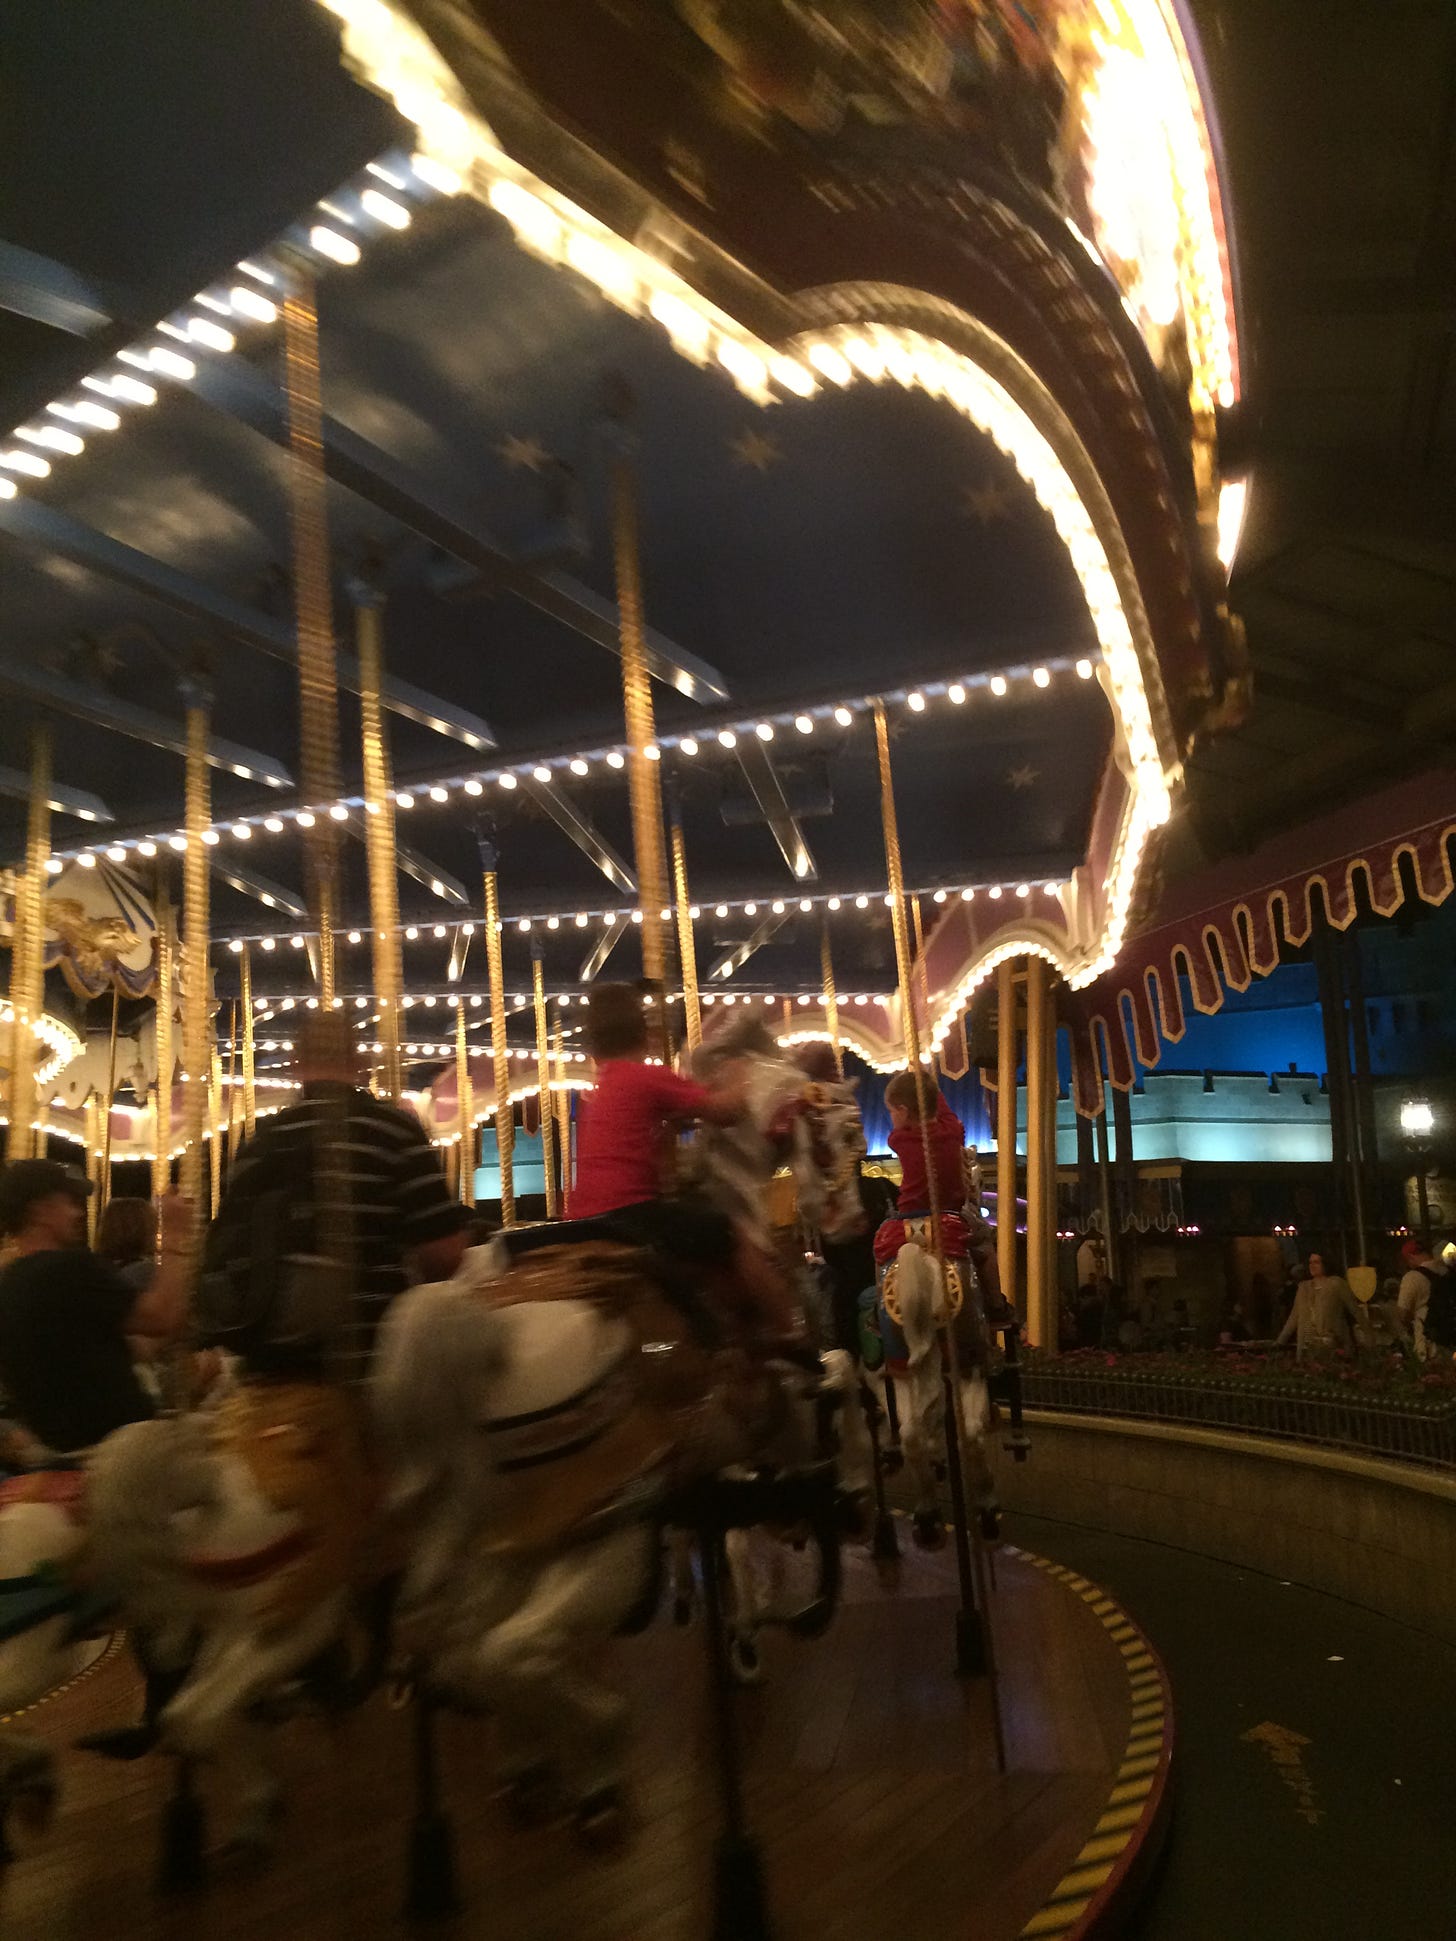 Merry-go-round in motion with blurred lights.